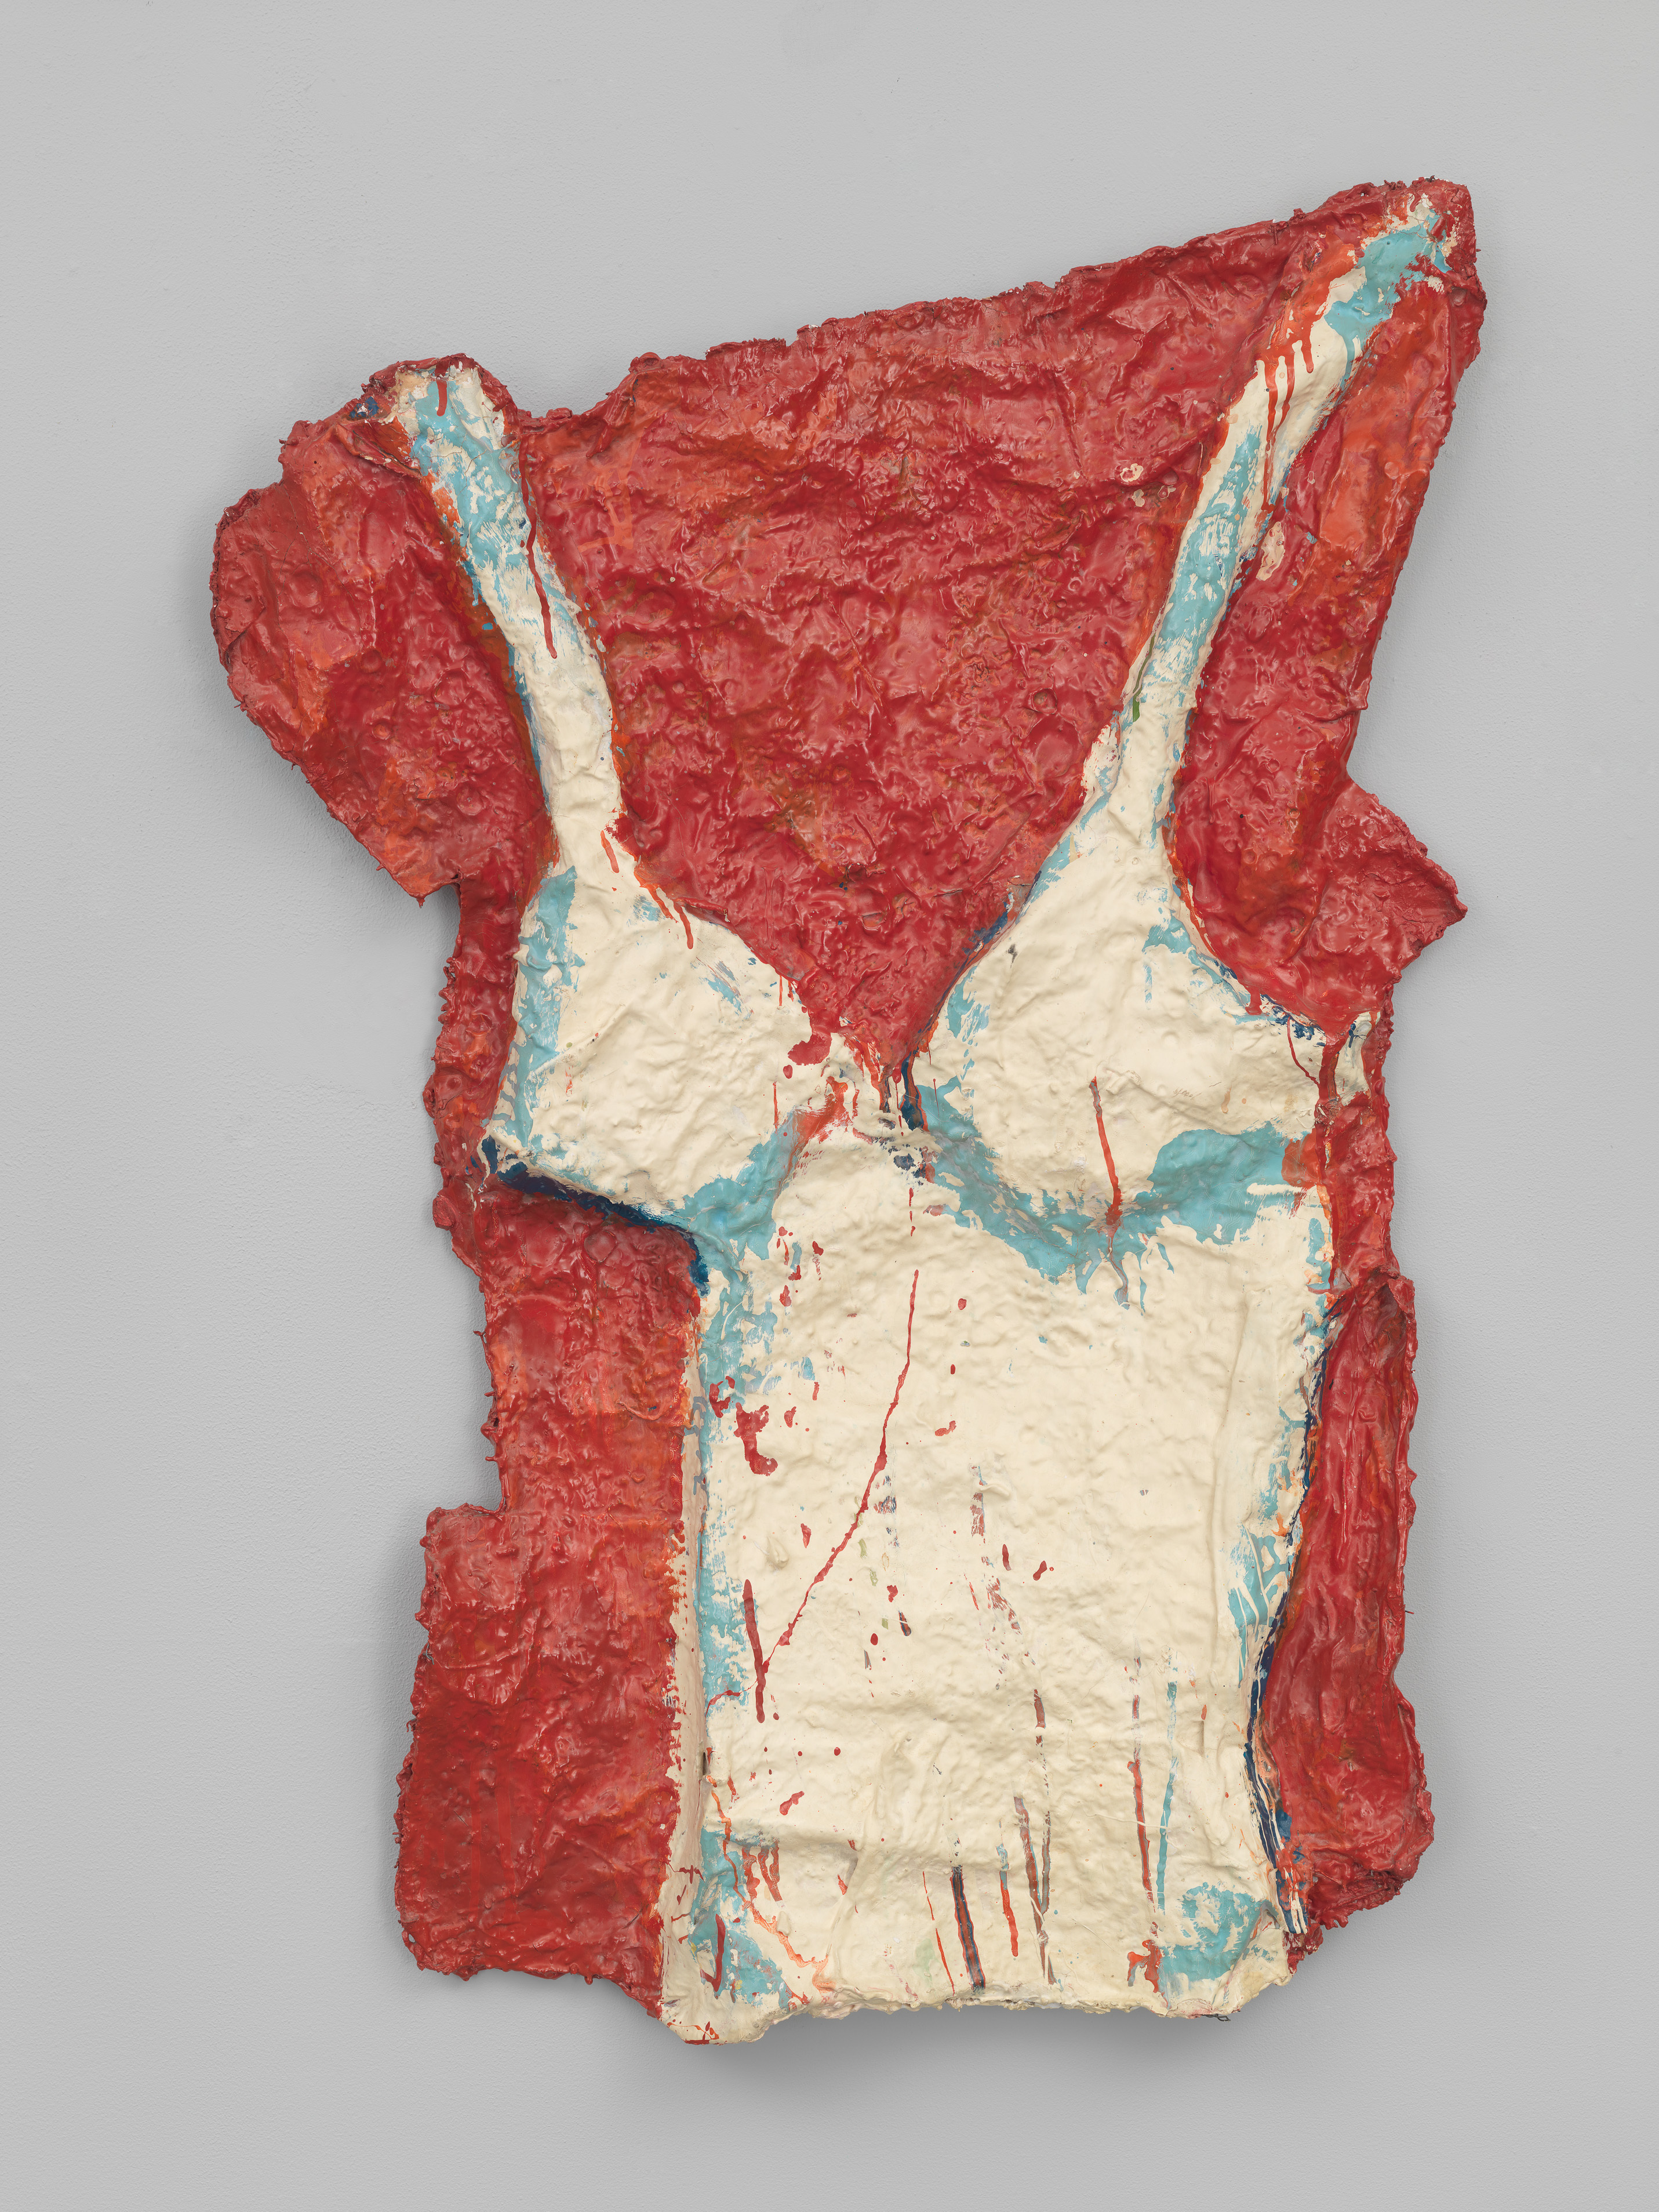 Claes Oldenburg, ‘Braselette,’ 1961. Muslin, plaster, chicken wire and enamel, 40 5/8 by 29 1/8 by 4in. (103.2 by 74 by 10.2cm). Whitney Museum of American Art, New York, NY. Gift of Howard and Jean Lipman (91.34.5) © Claes Oldenburg, courtesy Pace Gallery 